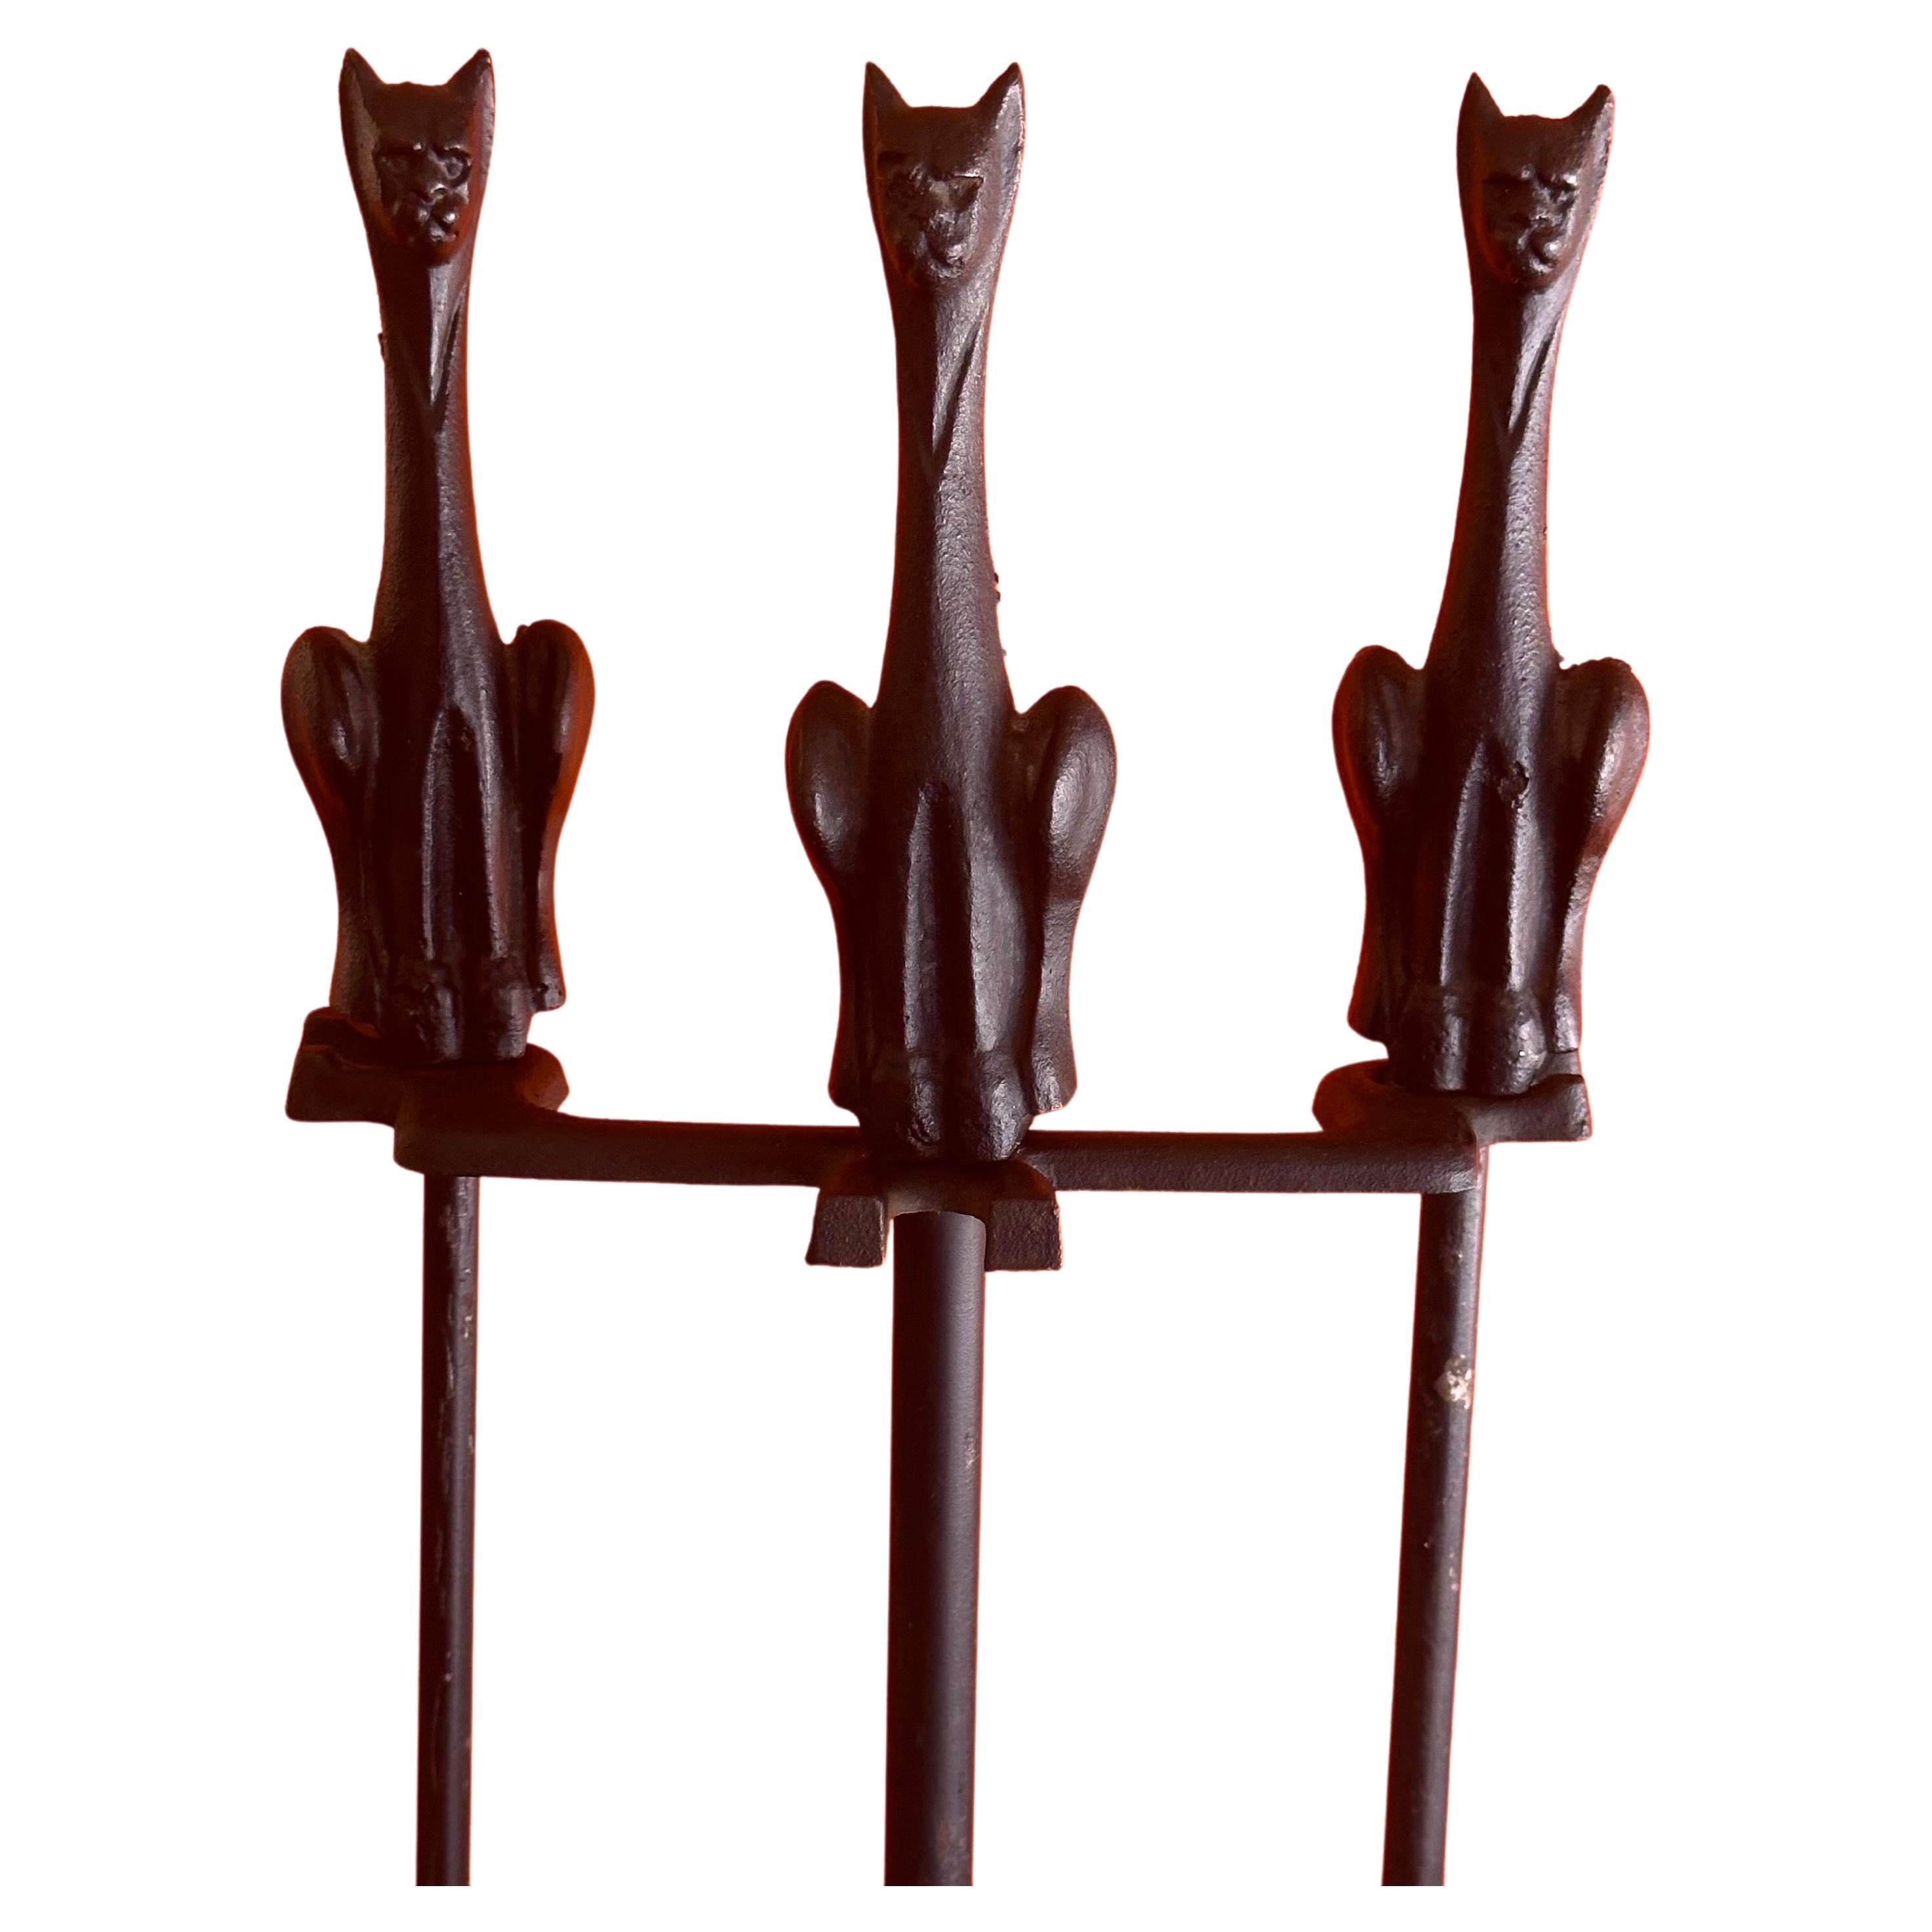 An extremely rare set of MCM fireplace tools with cat handles and stand, circa 1950s. There are three tools (shovel, brush and poker) and a single stand in good vintage condition. The set is heavy and well cast with a great look; it measures 11